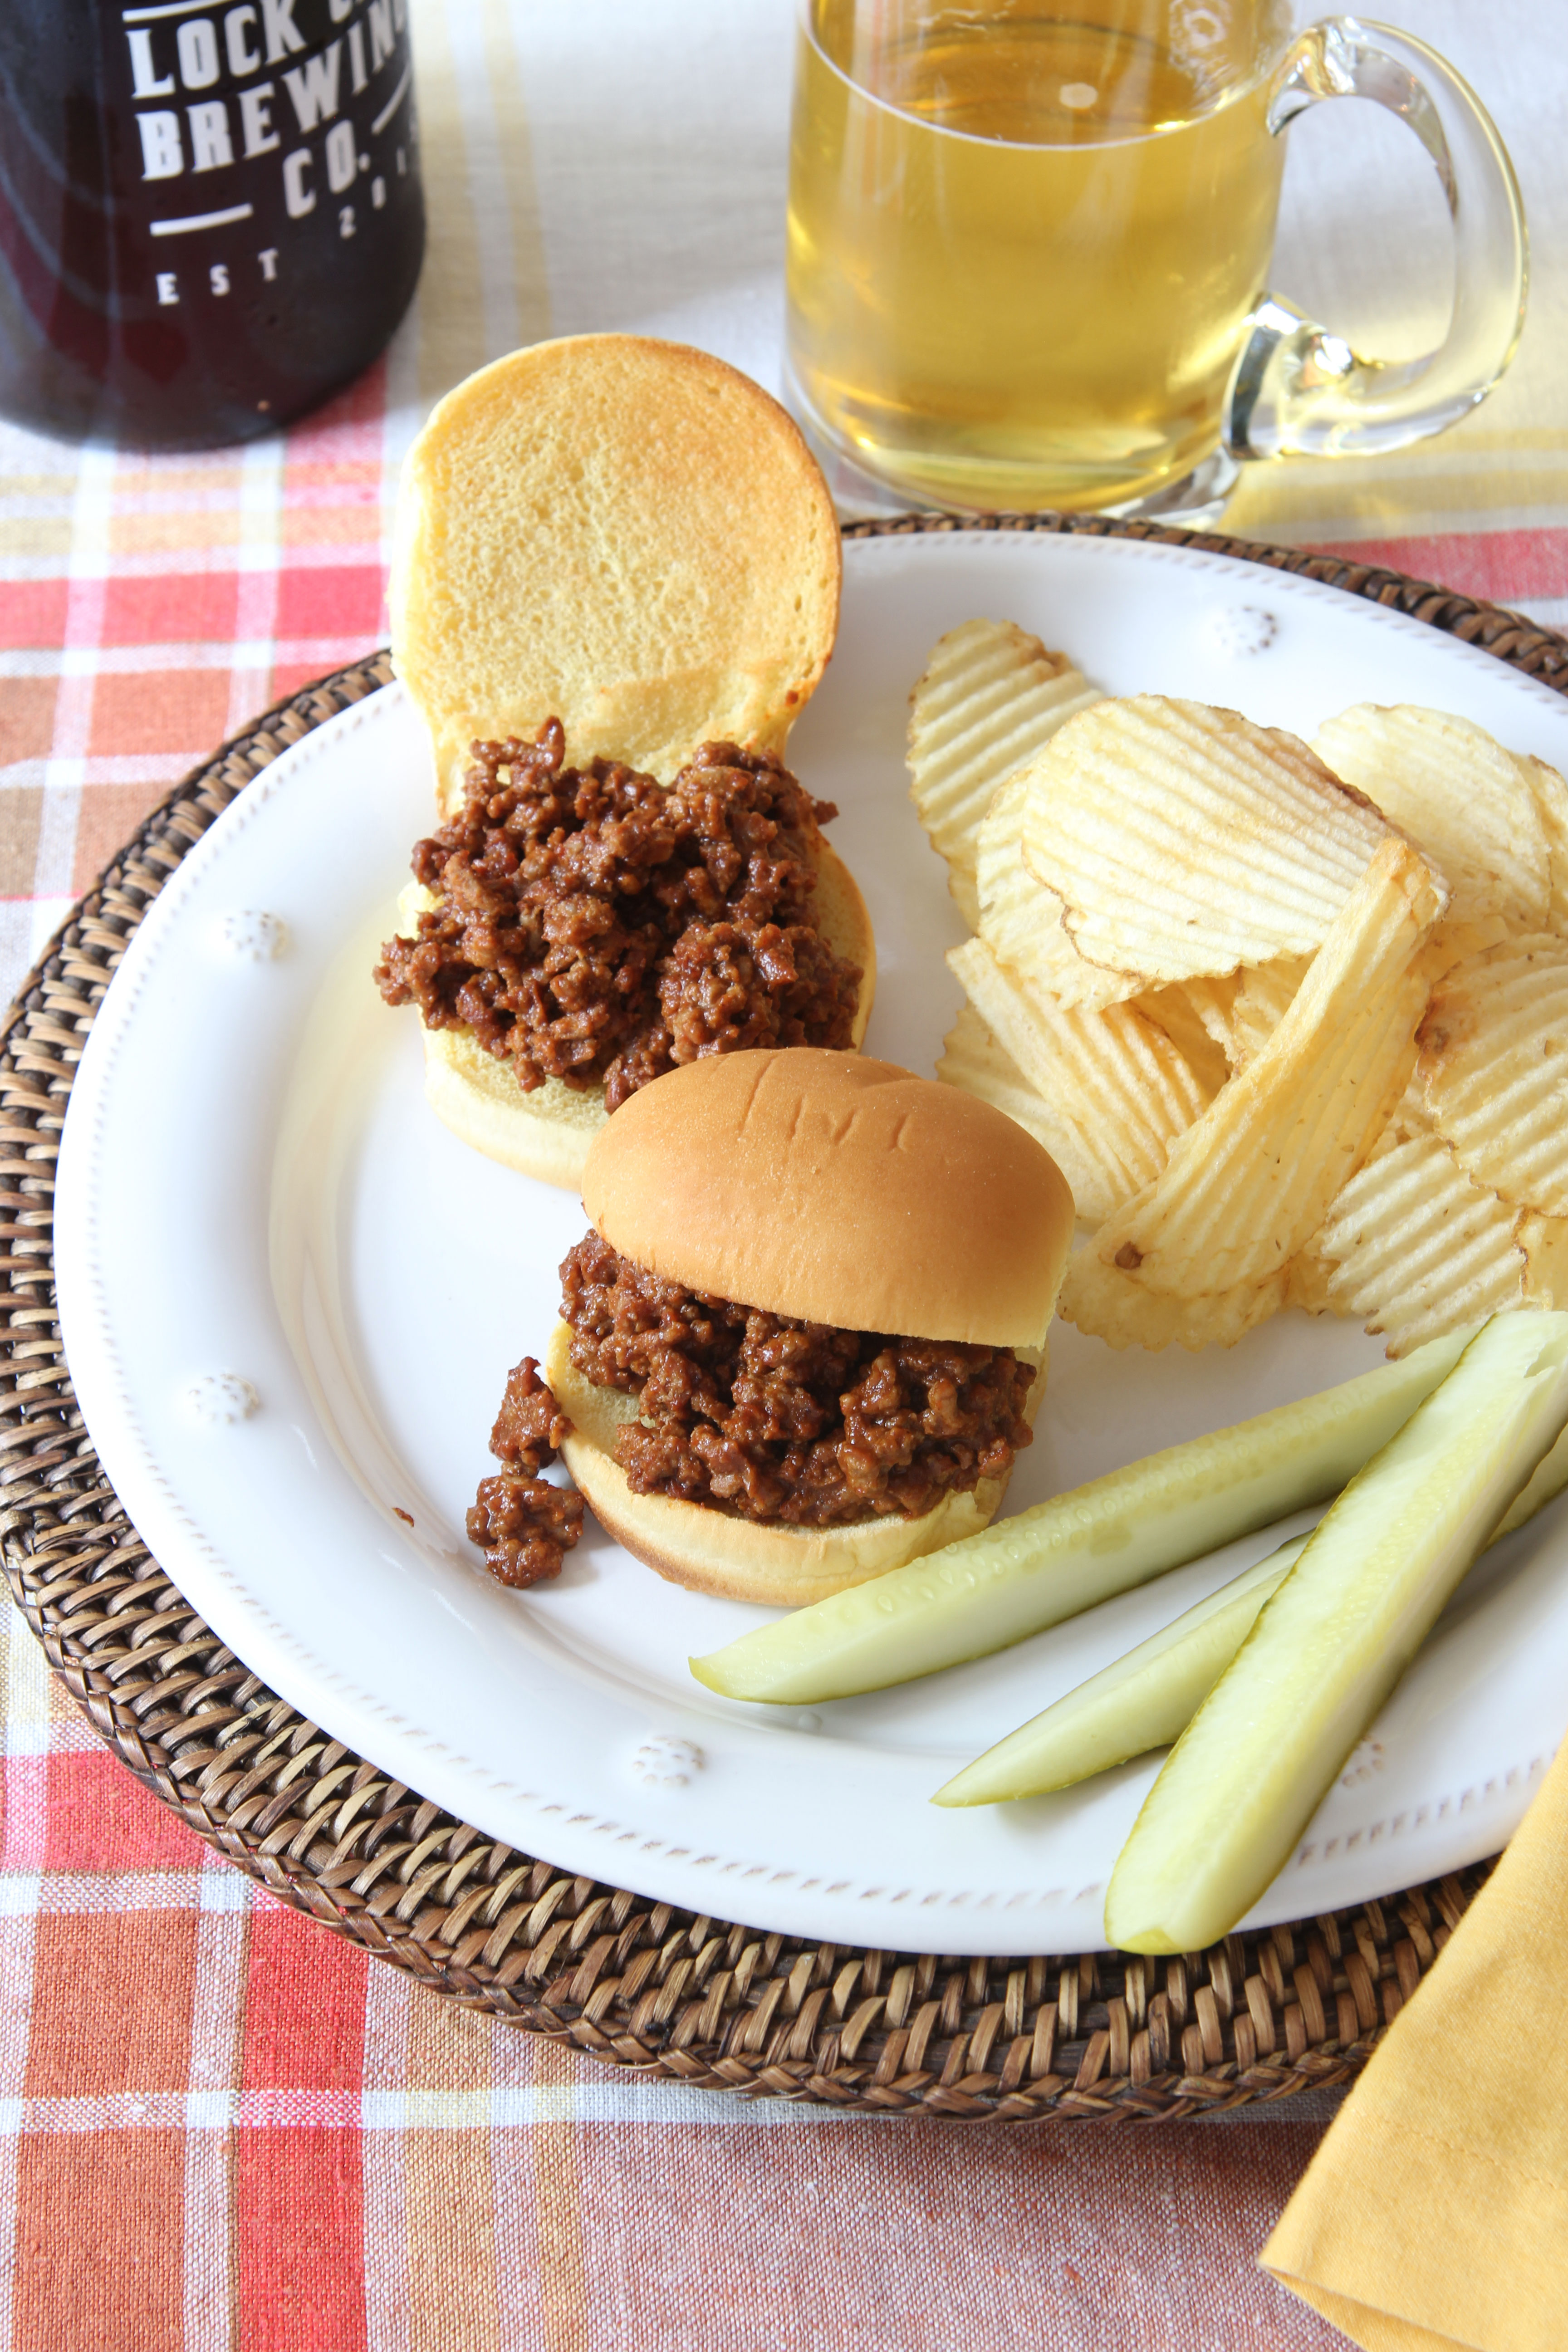 Ridgely Brode serves up delicious Sloppy Joe's made with spices from a local Connecticut source on her blog, Ridgely's Radar.